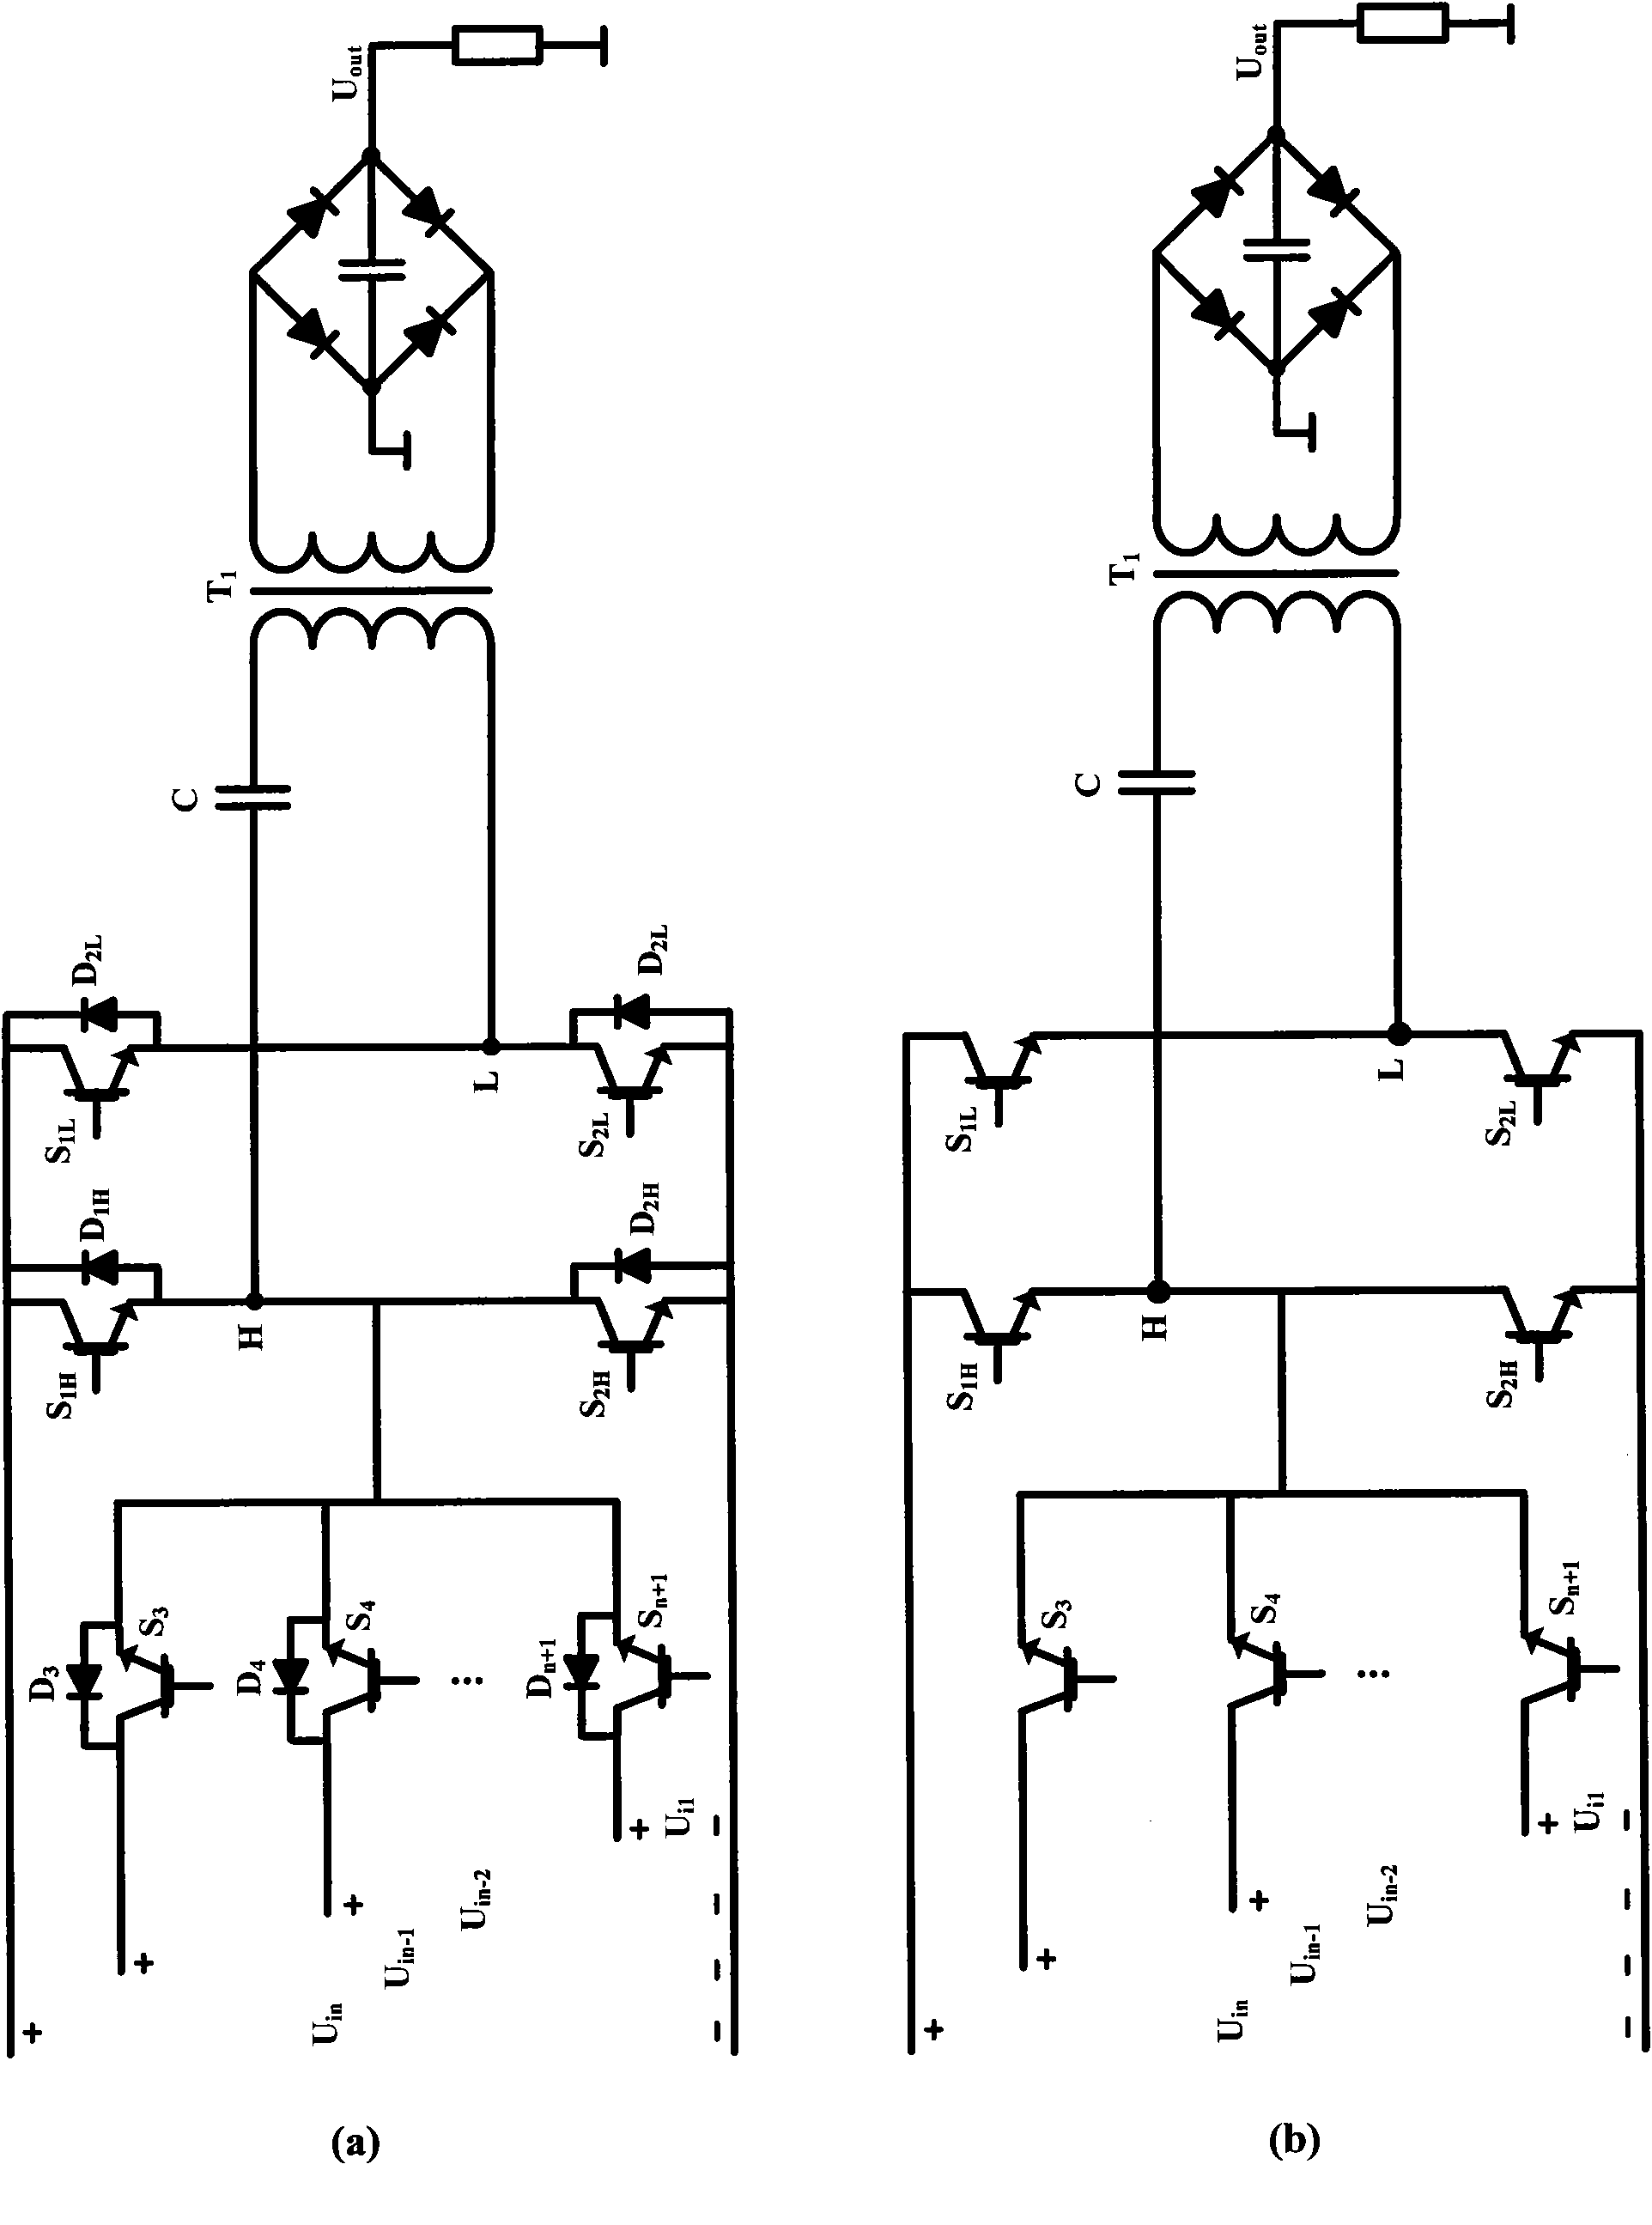 Topology and constant-frequency voltage hysteresis control of multi-level inverter